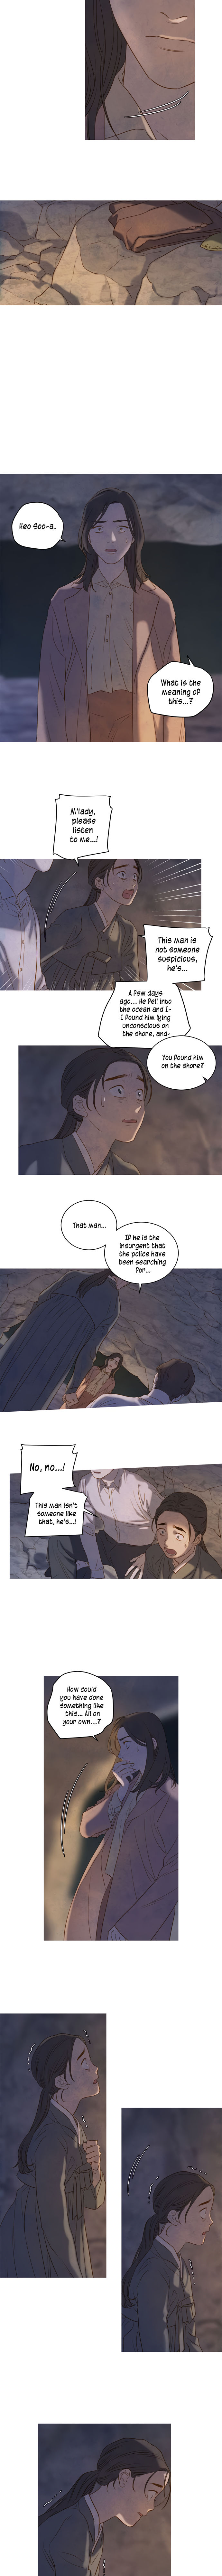 The Whale Star - The Gyeongseong Mermaid - Chapter 5 Page 2